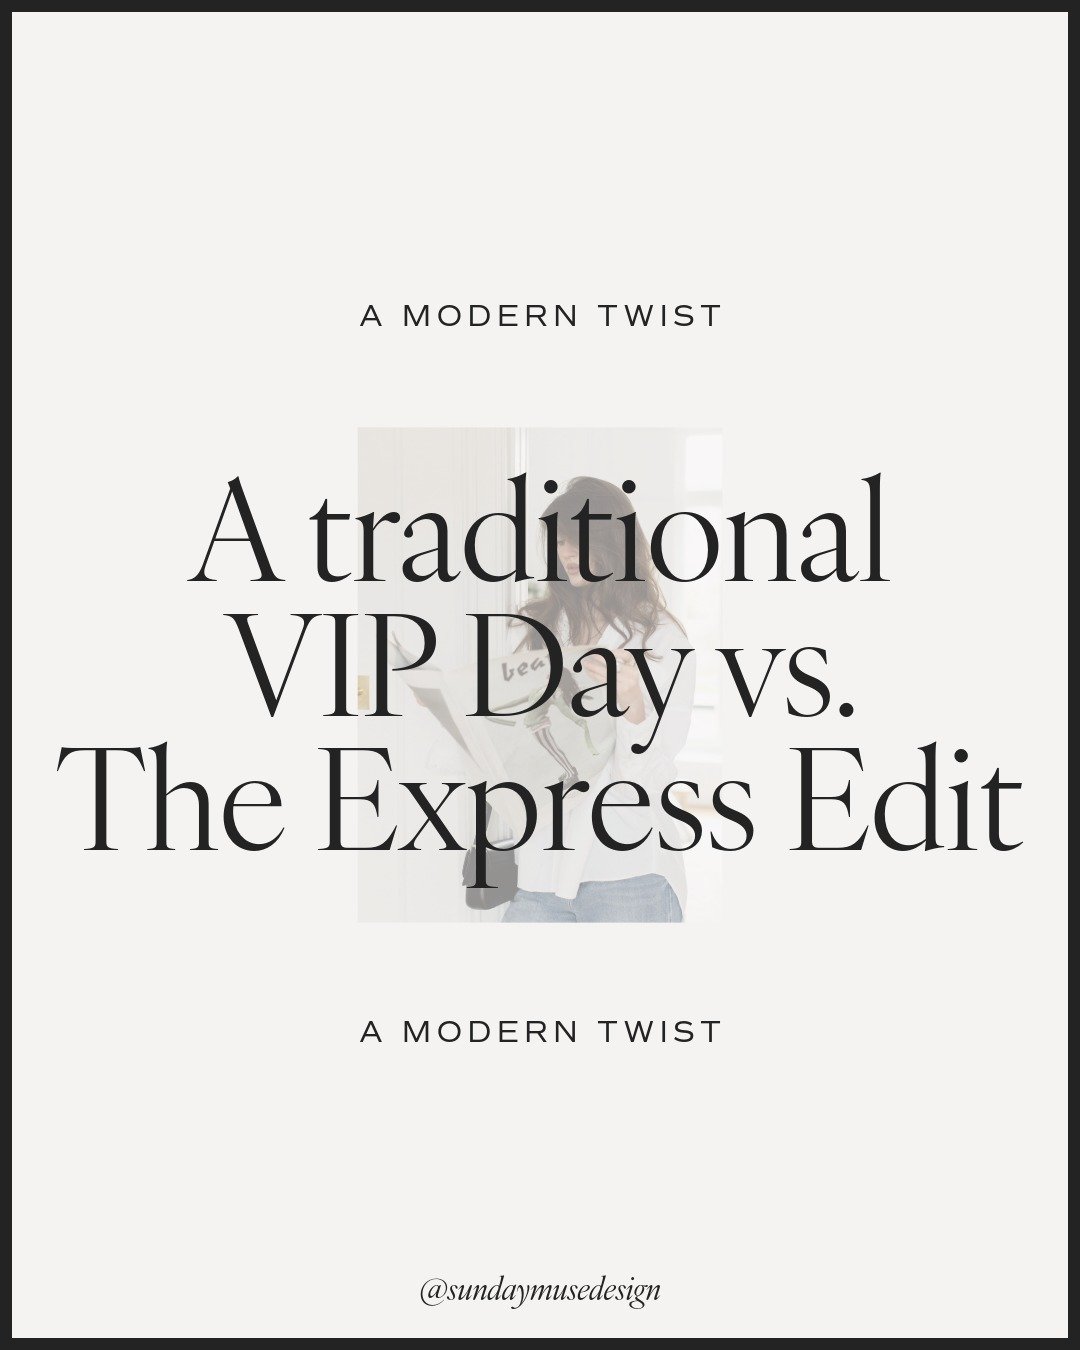 Think a VIP Day can't get any better? 

Yes, a traditional VIP Day is fantastic for quick, efficient progress&mdash;PERFECT when you need things done right and done fast.

They&rsquo;re straightforward, super efficient, and exactly what you need if y